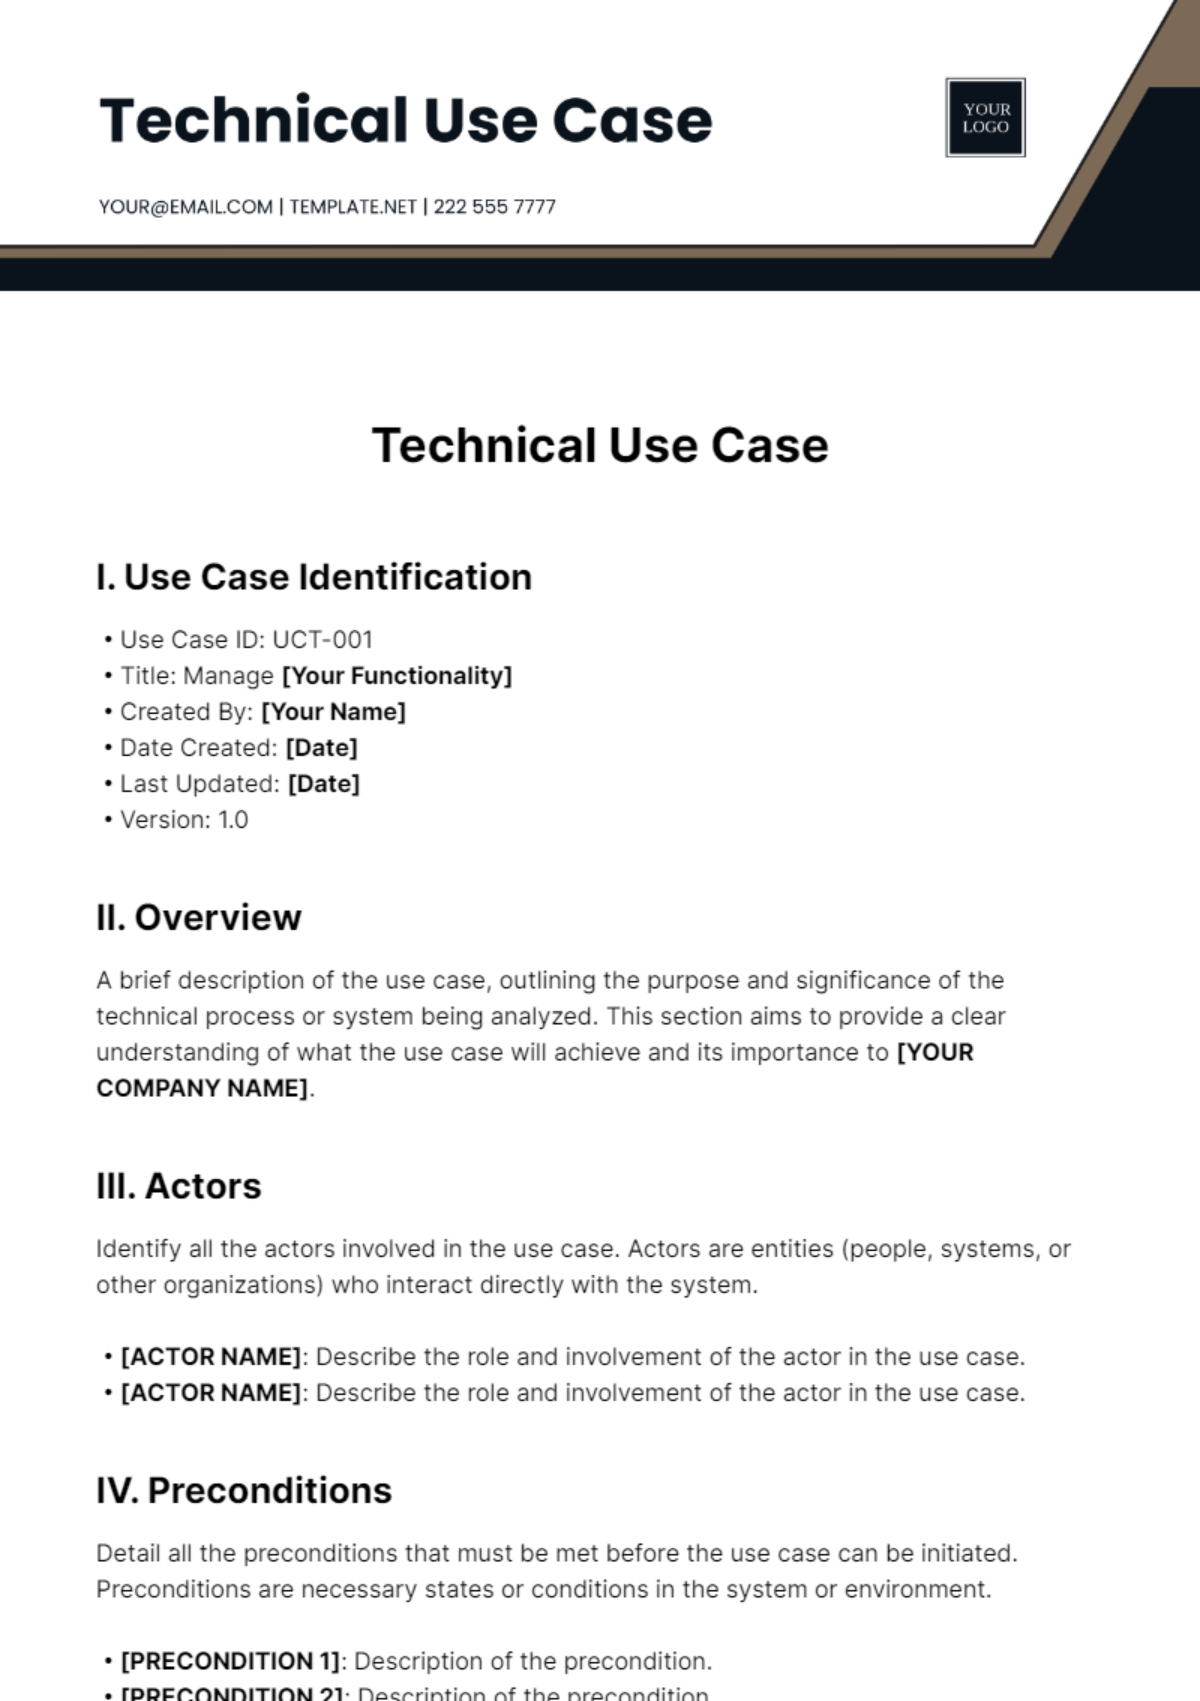 Technical Use Case Template